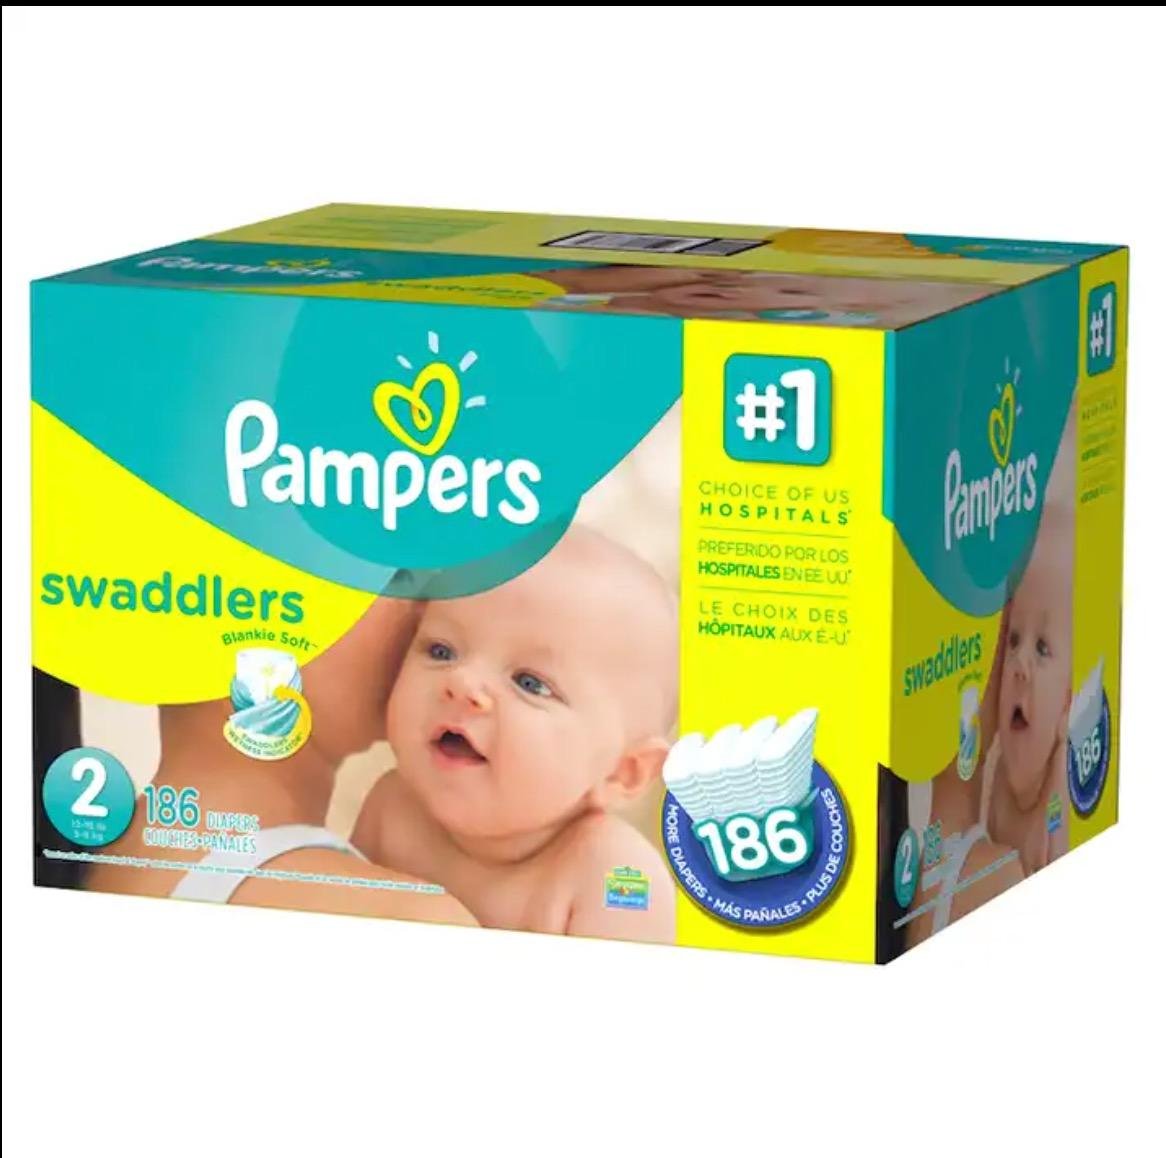 Pampers Swaddlers Disposable Baby Diapers Factory Sealed 2